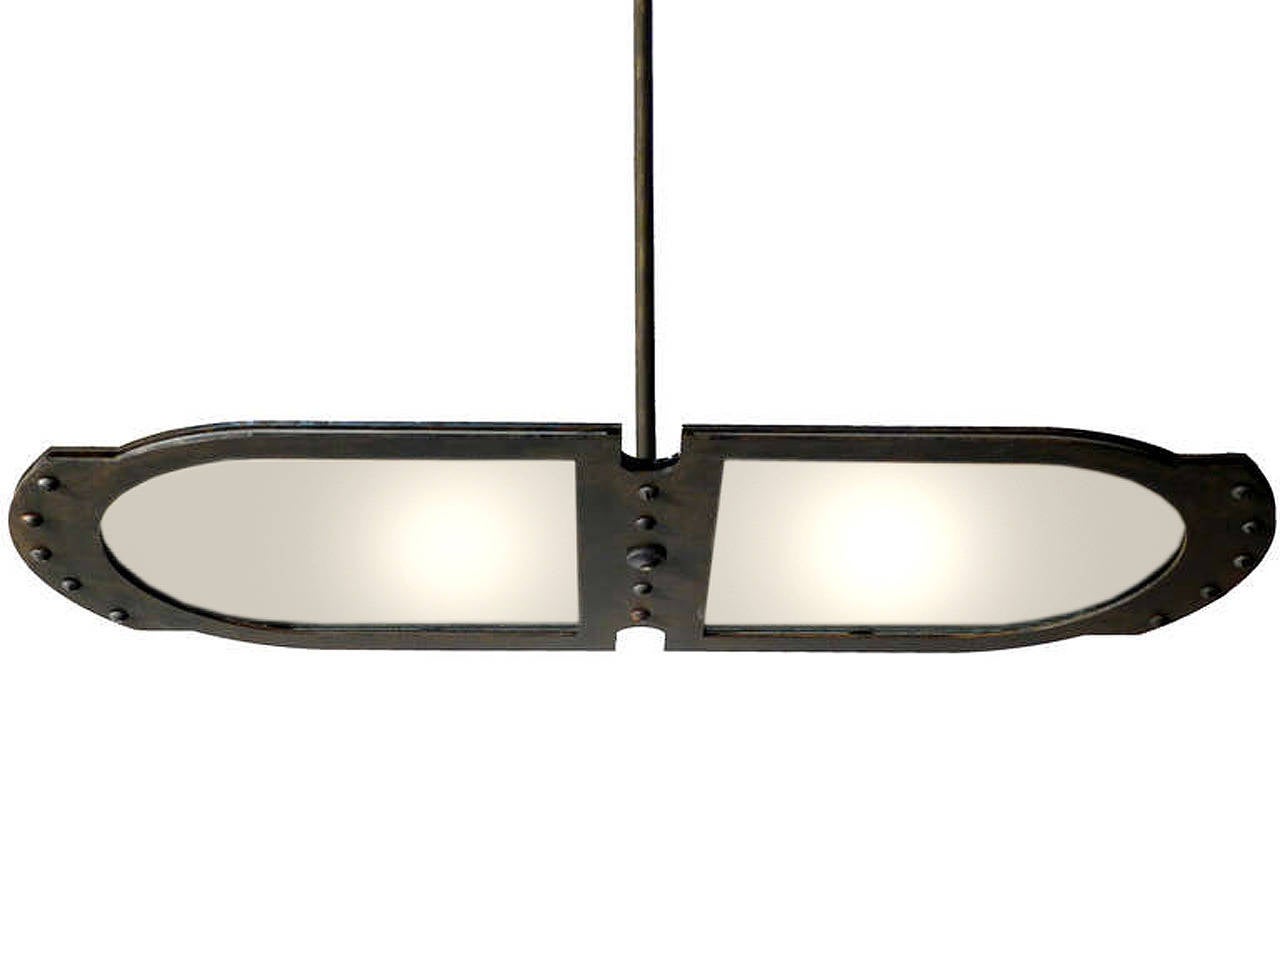 This large tracery style Industrial pendant fits comfortably with most styles. It's very architectural with clean lines… just look at the profile. The heavy steel frame has an aged patina and Industrial accents that are not over done. We designed